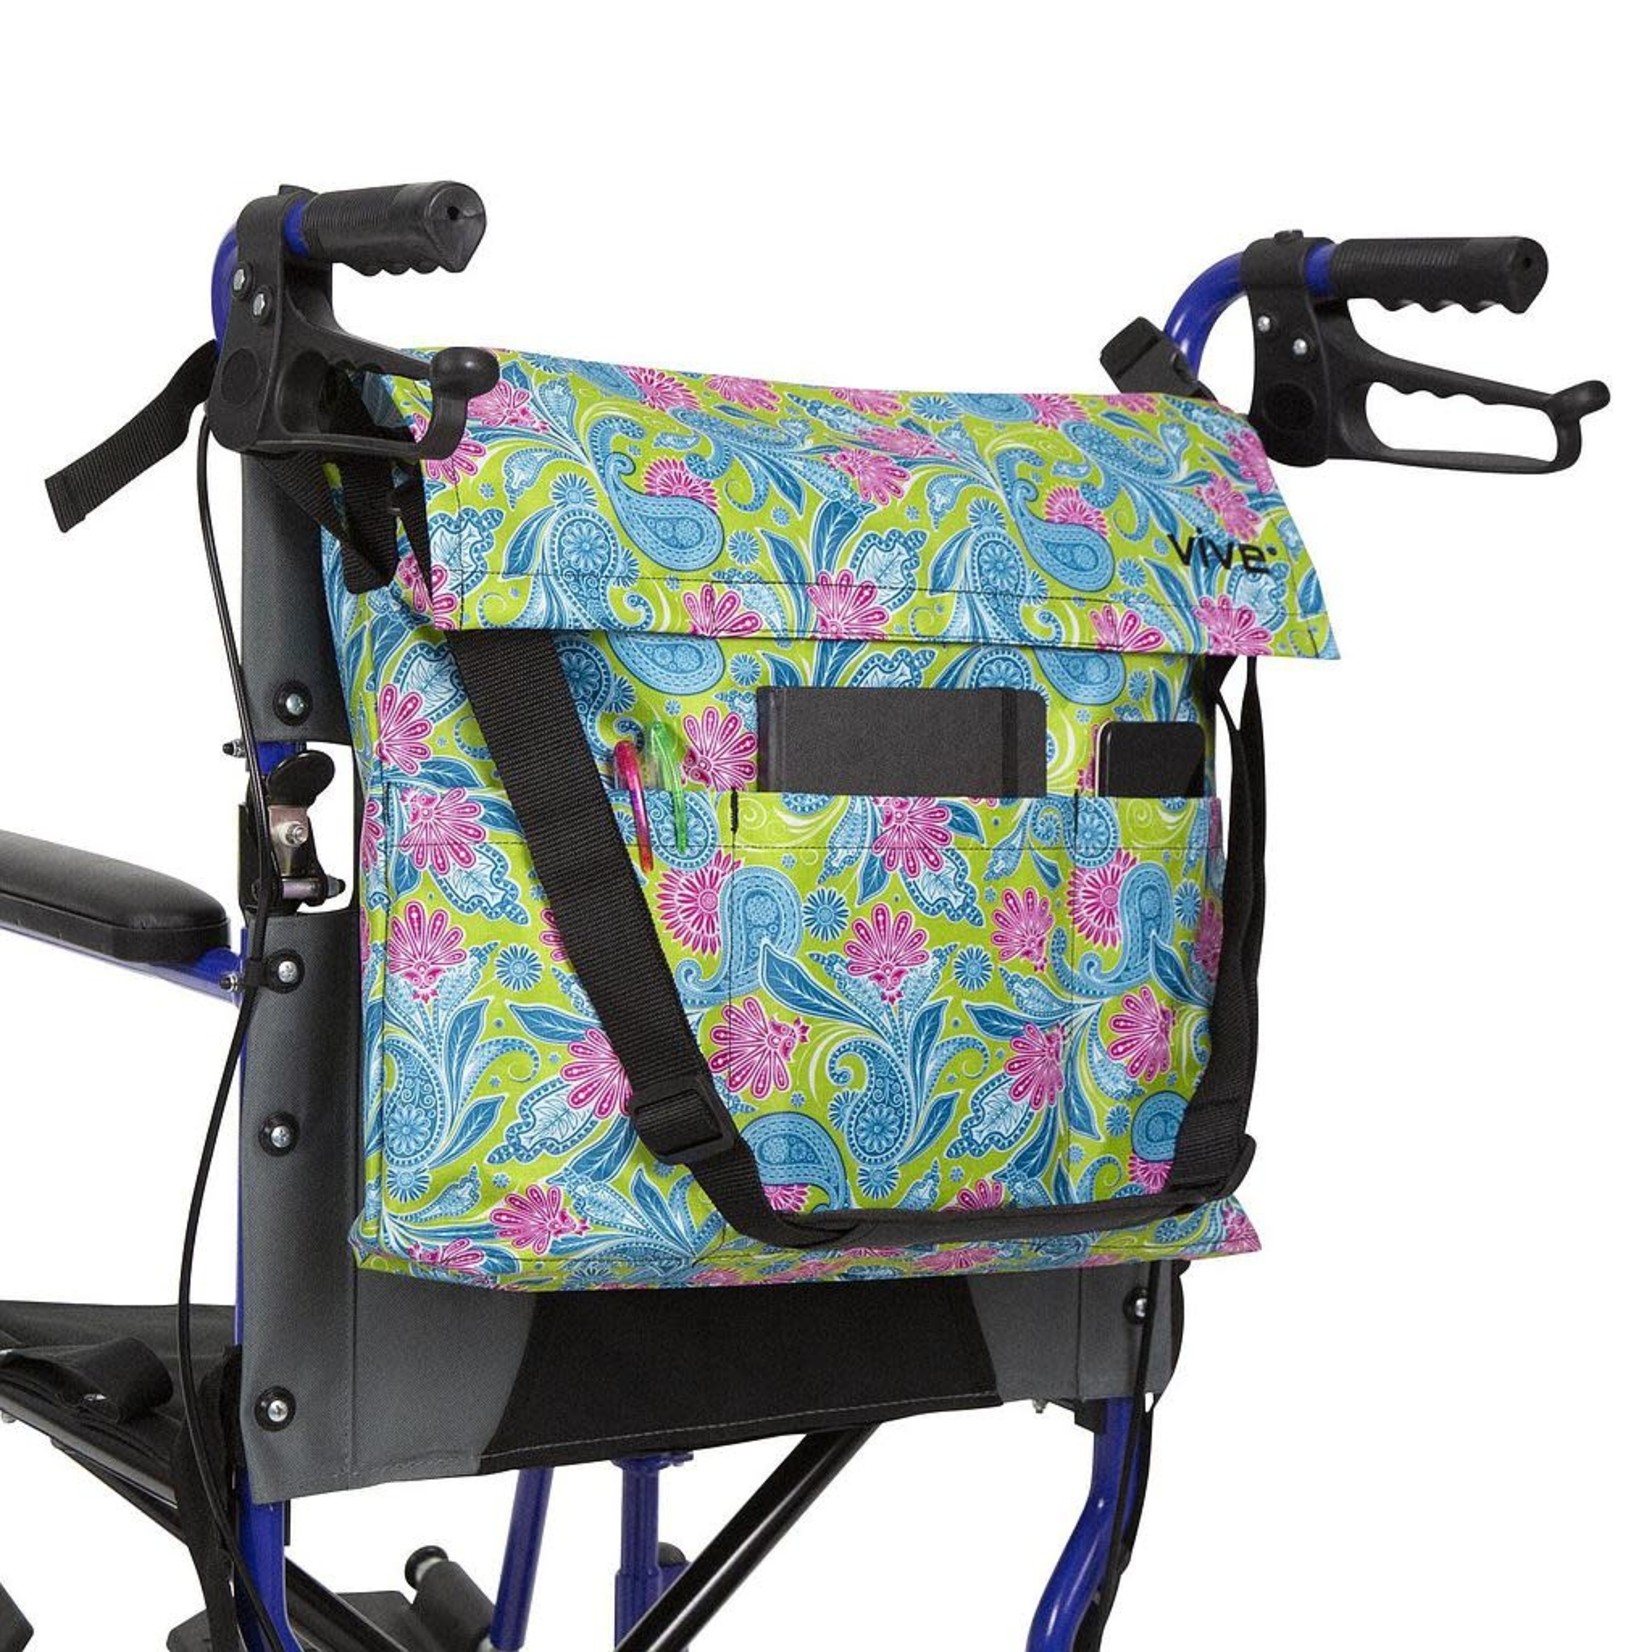 Vive Health Wheelchair Bag in Colored Patterns